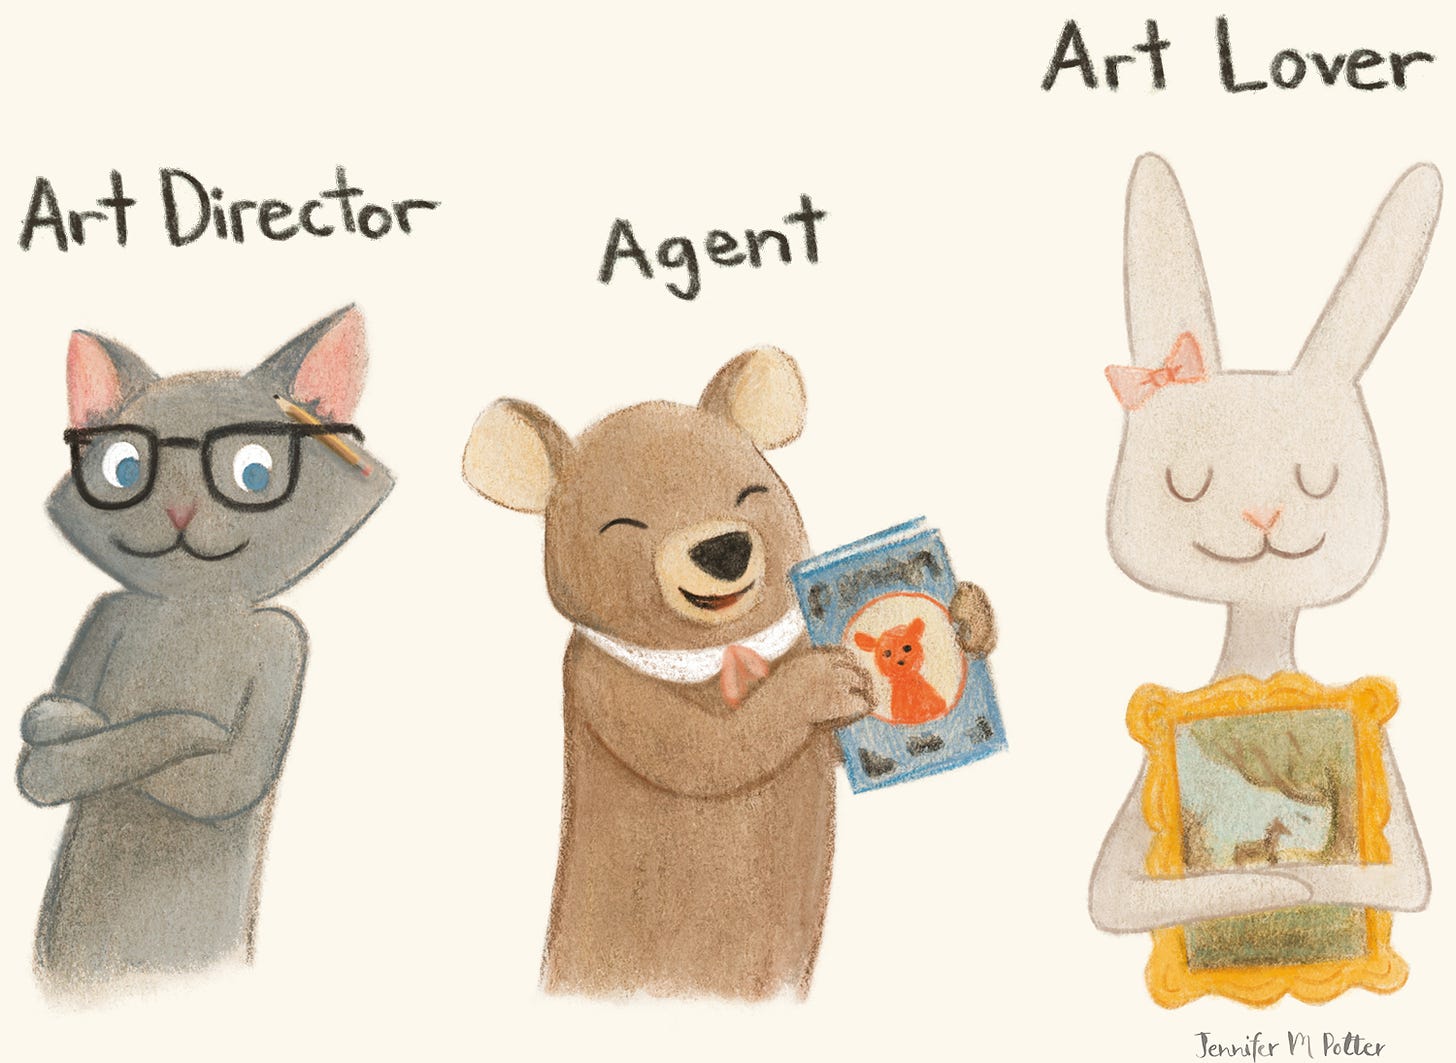 Illustration by Jennifer M Potter of animal versions of an art director, an agent, and an art lover